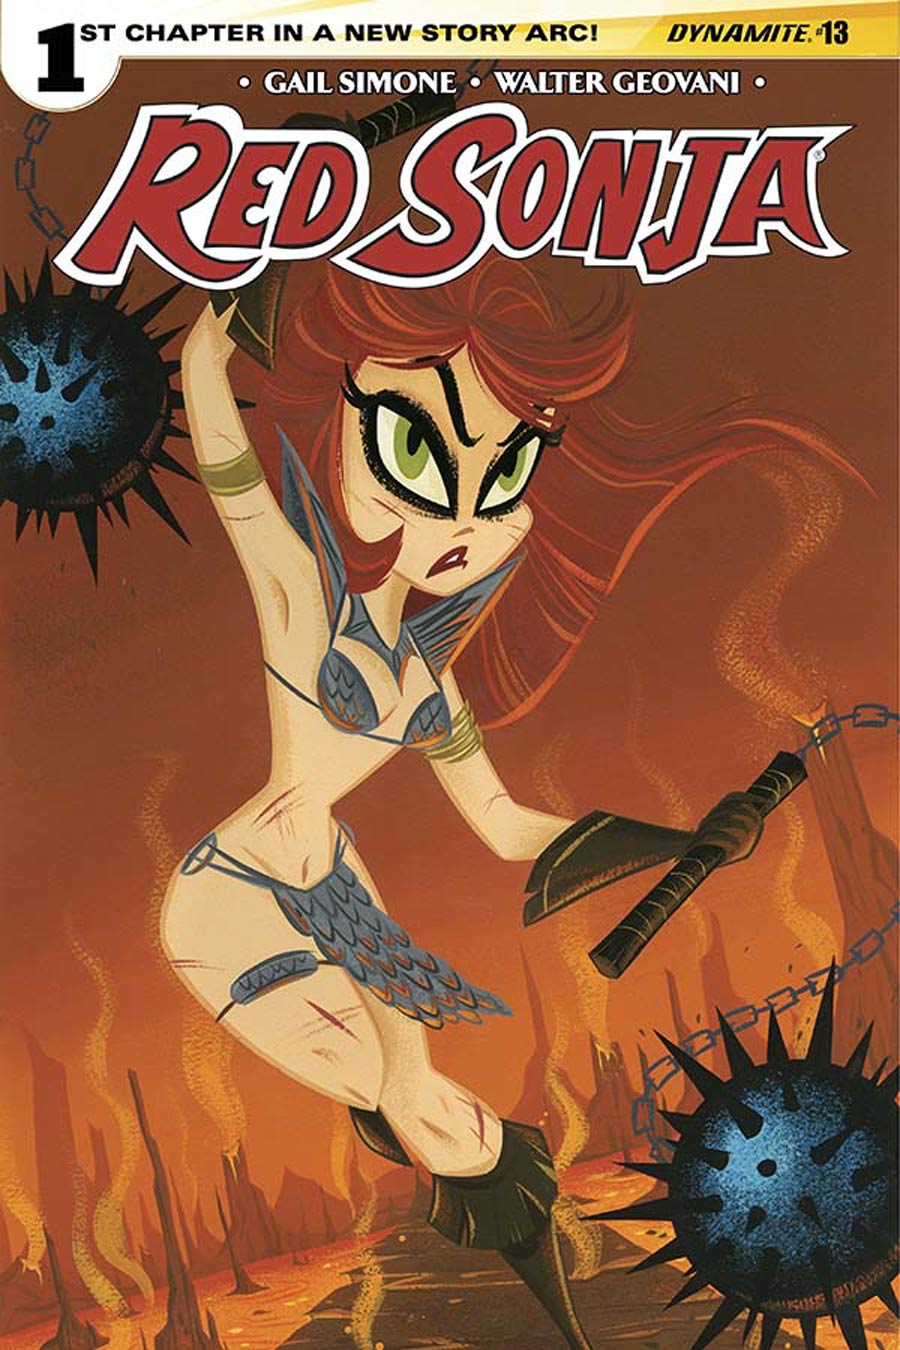 Red Sonja Vol 5 #13 Cover C Variant Stephanie Buscema Subscription Cover